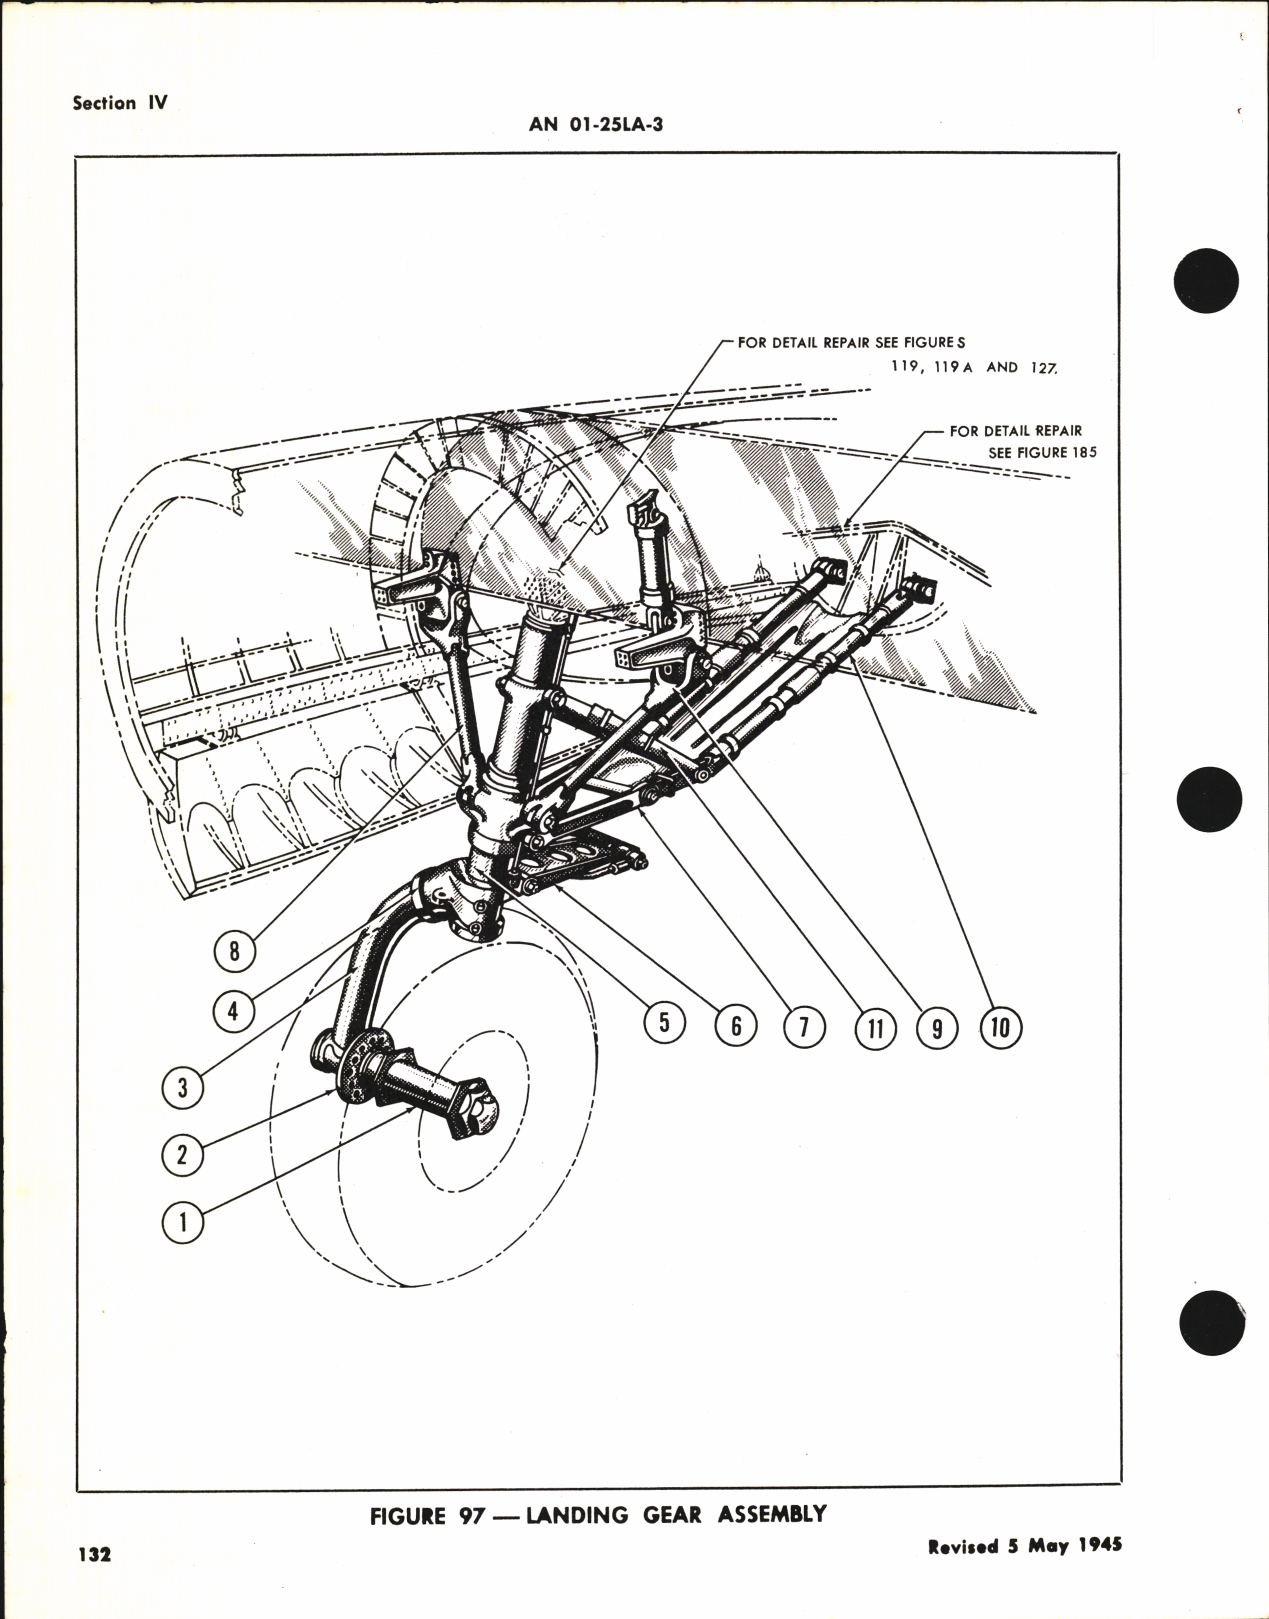 Sample page 8 from AirCorps Library document: Structural Repair Instructions for C-46, ZC-46A, C-46D, and C-46F